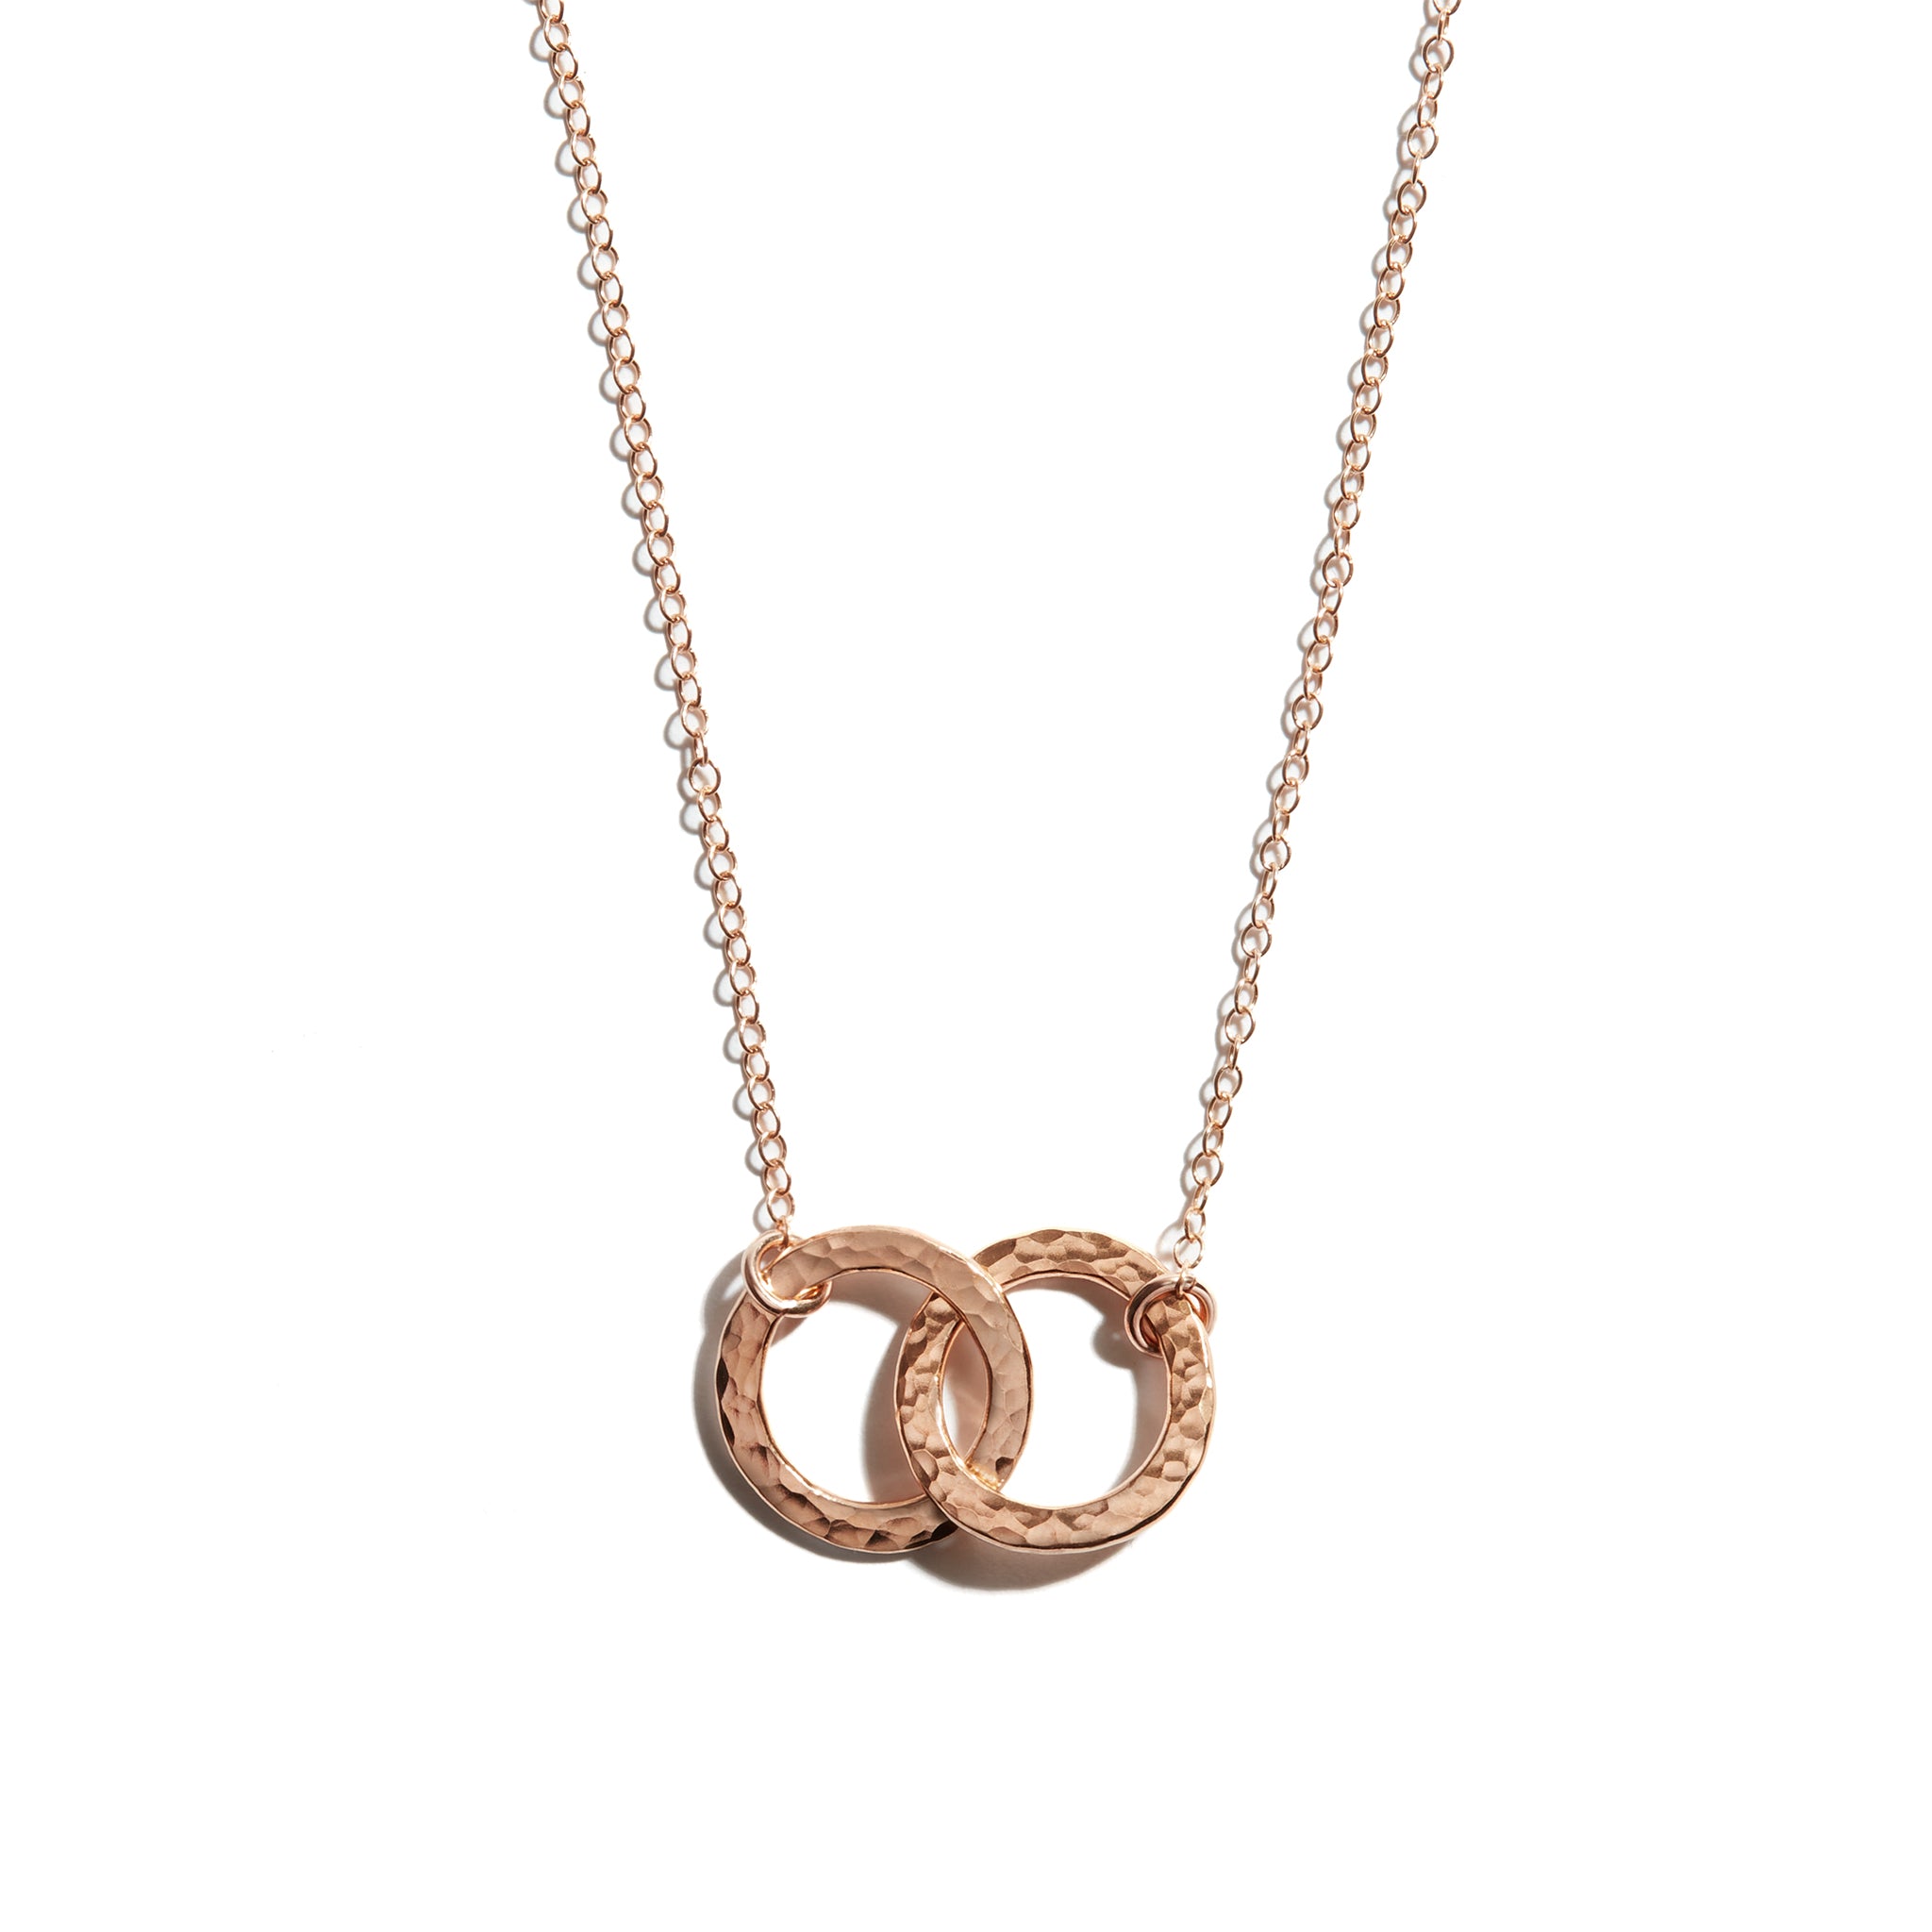 Gerry Browne Gold 9ct Double Circle Pendant - Jewellery from Gerry Browne  Jewellers UK